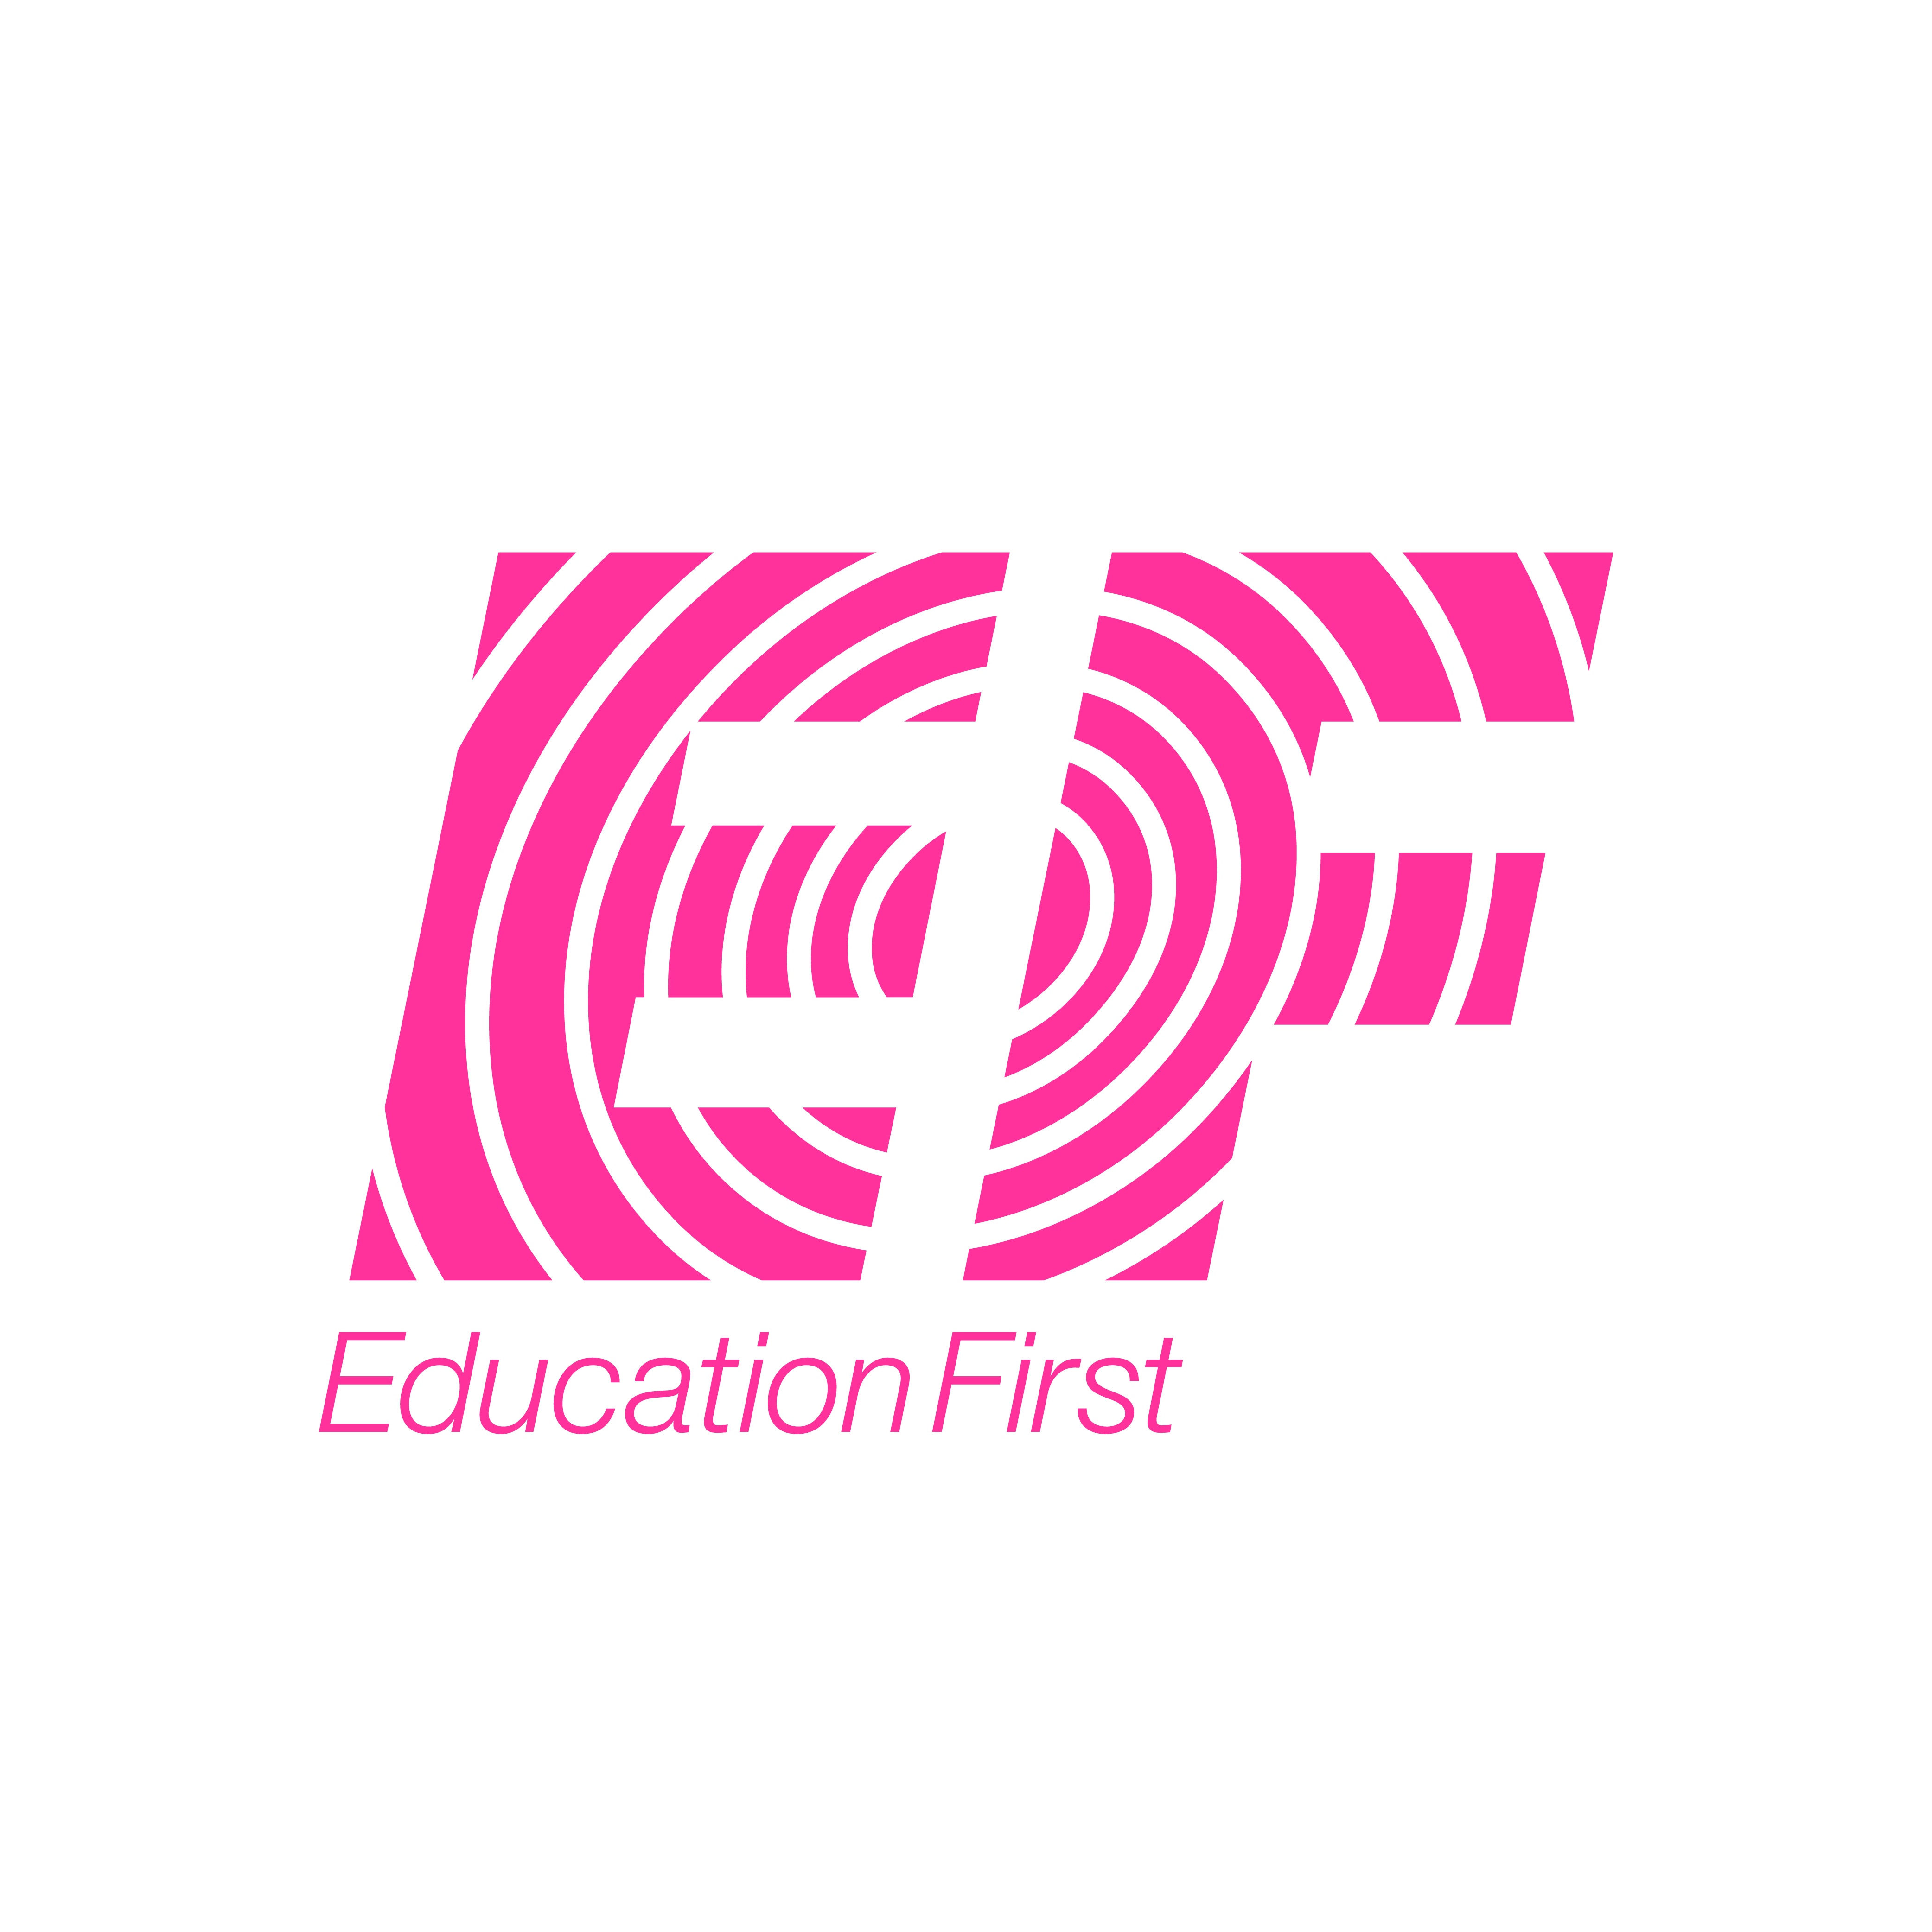 Design jobs at EF Education First